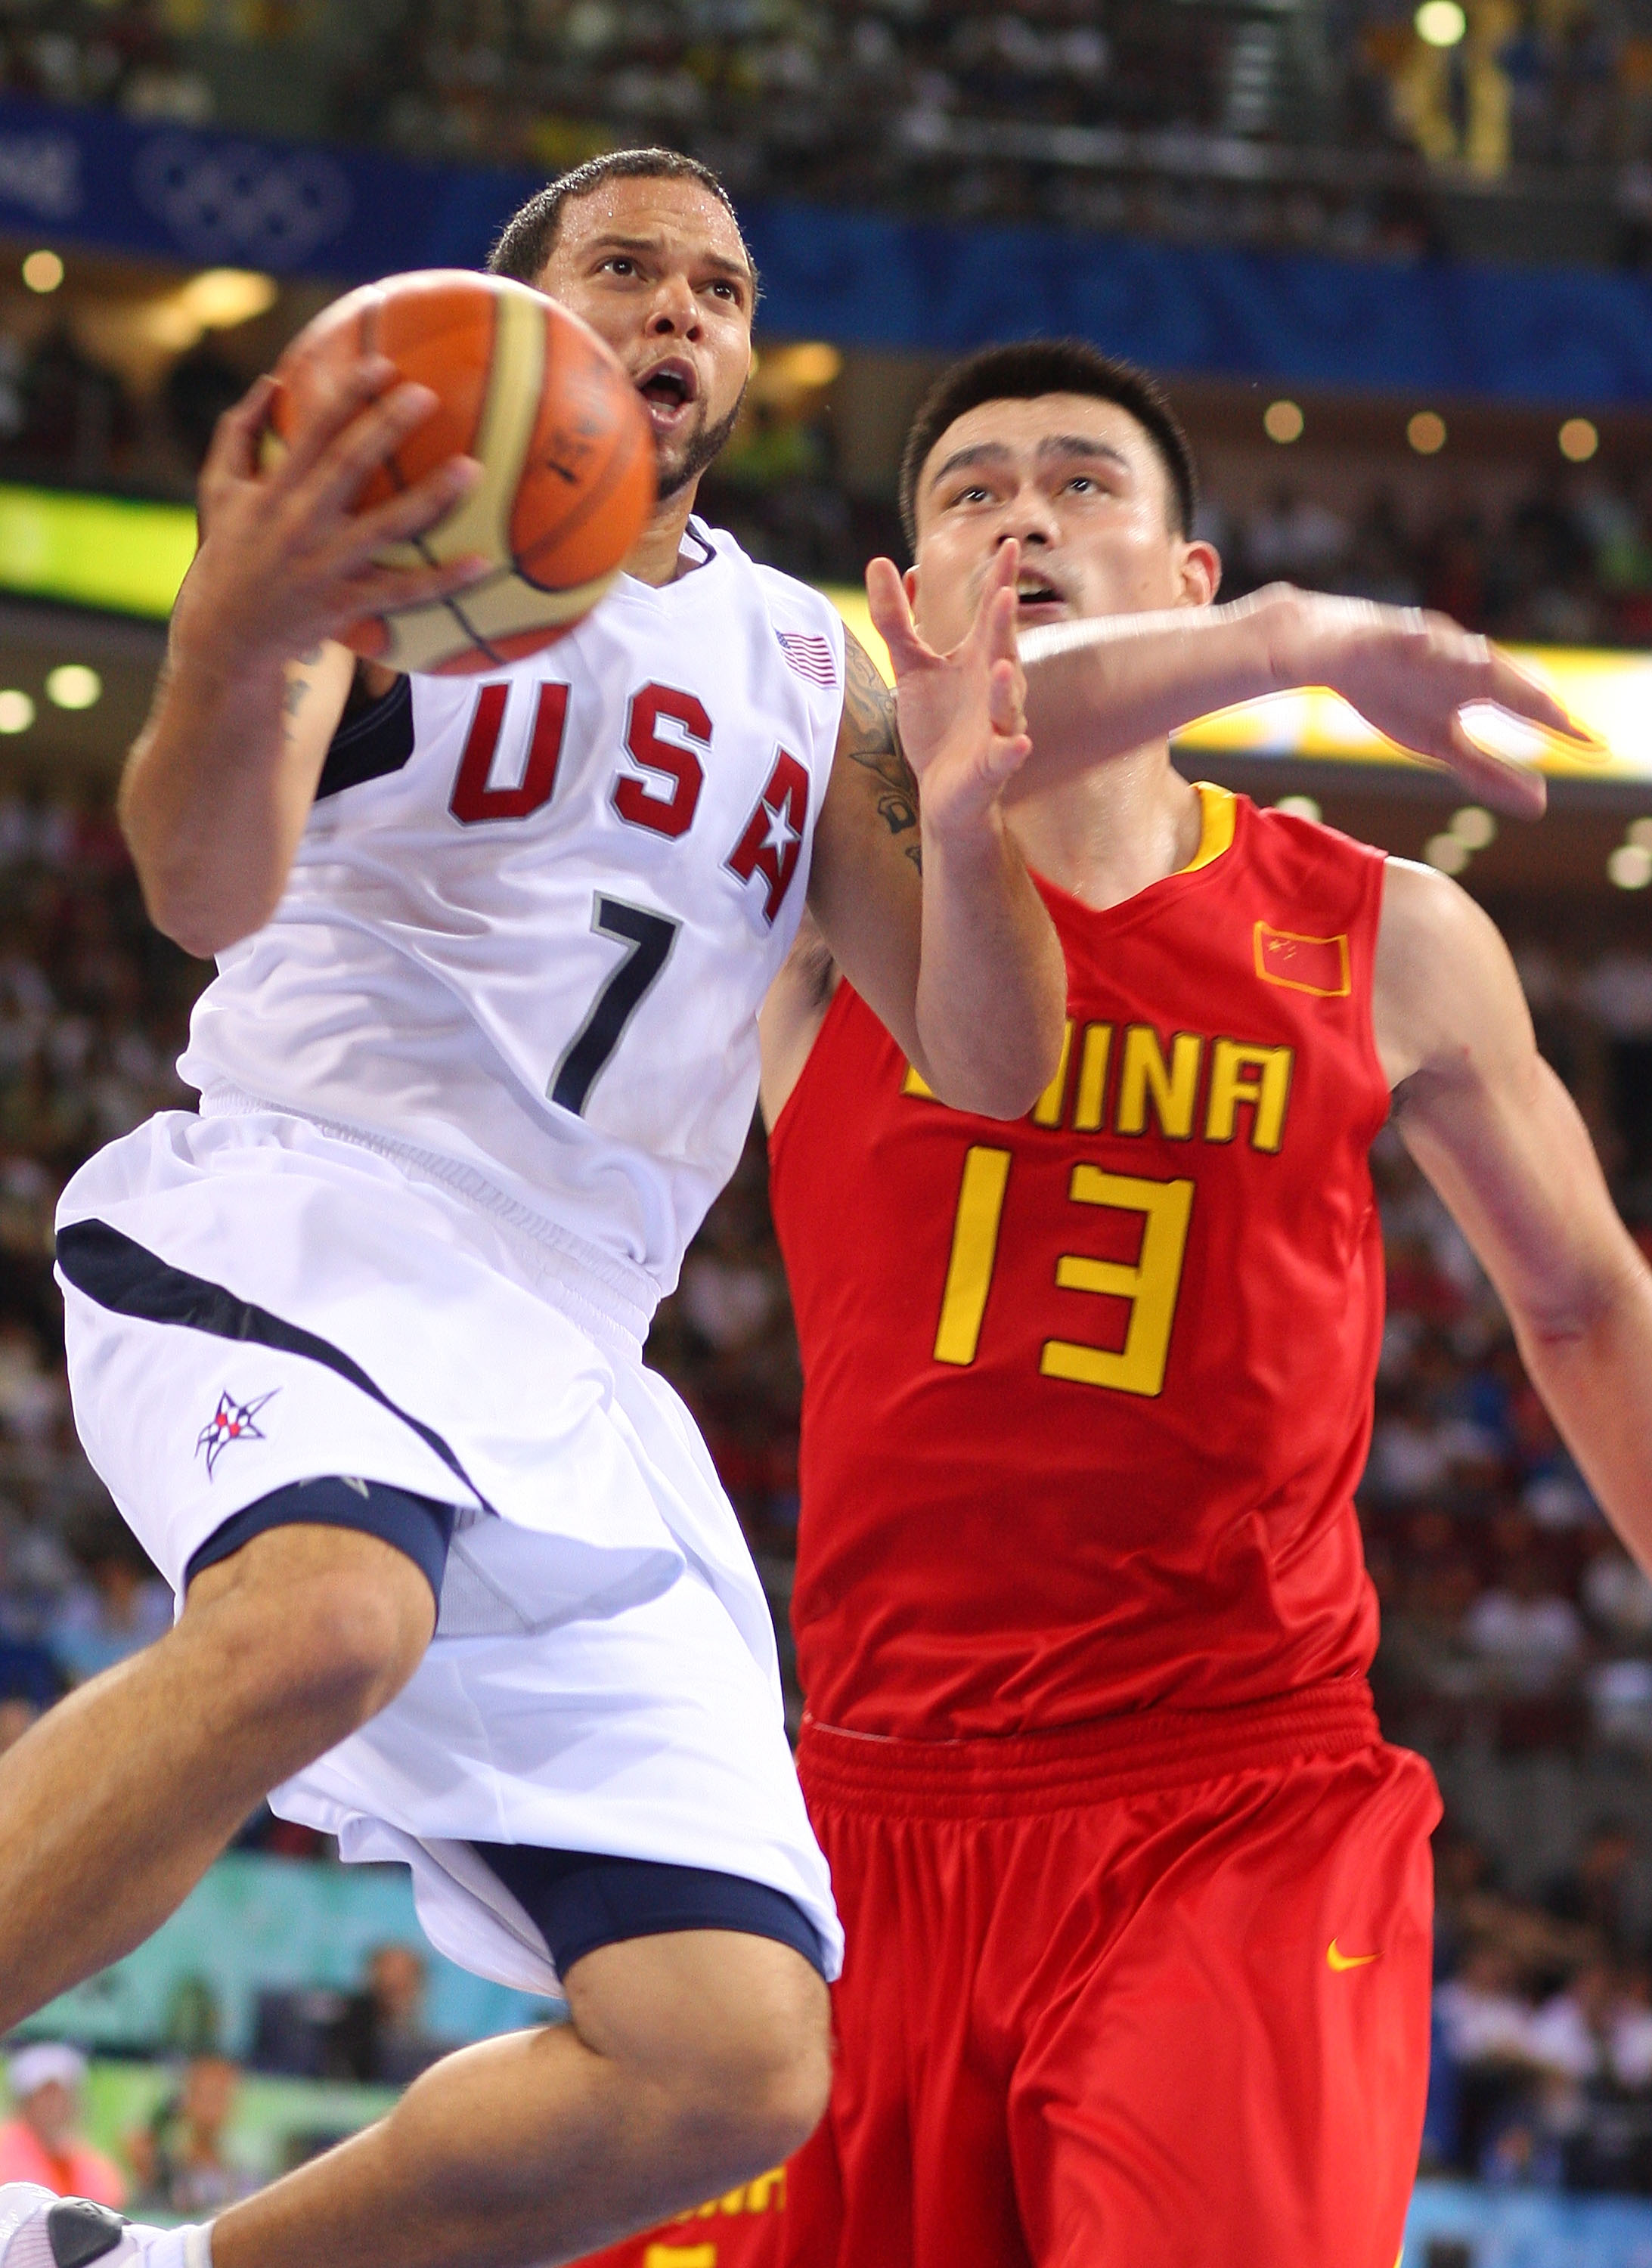 BEIJING - AUGUST 10:  Deron Williams #7 of the United States drives past Yao Ming #13 of China during the day 2 preliminary game at the Beijing 2008 Olympic Games in the Beijing Olympic Basketball Gymnasium on August 10, 2008 in Beijing, China.  (Photo by